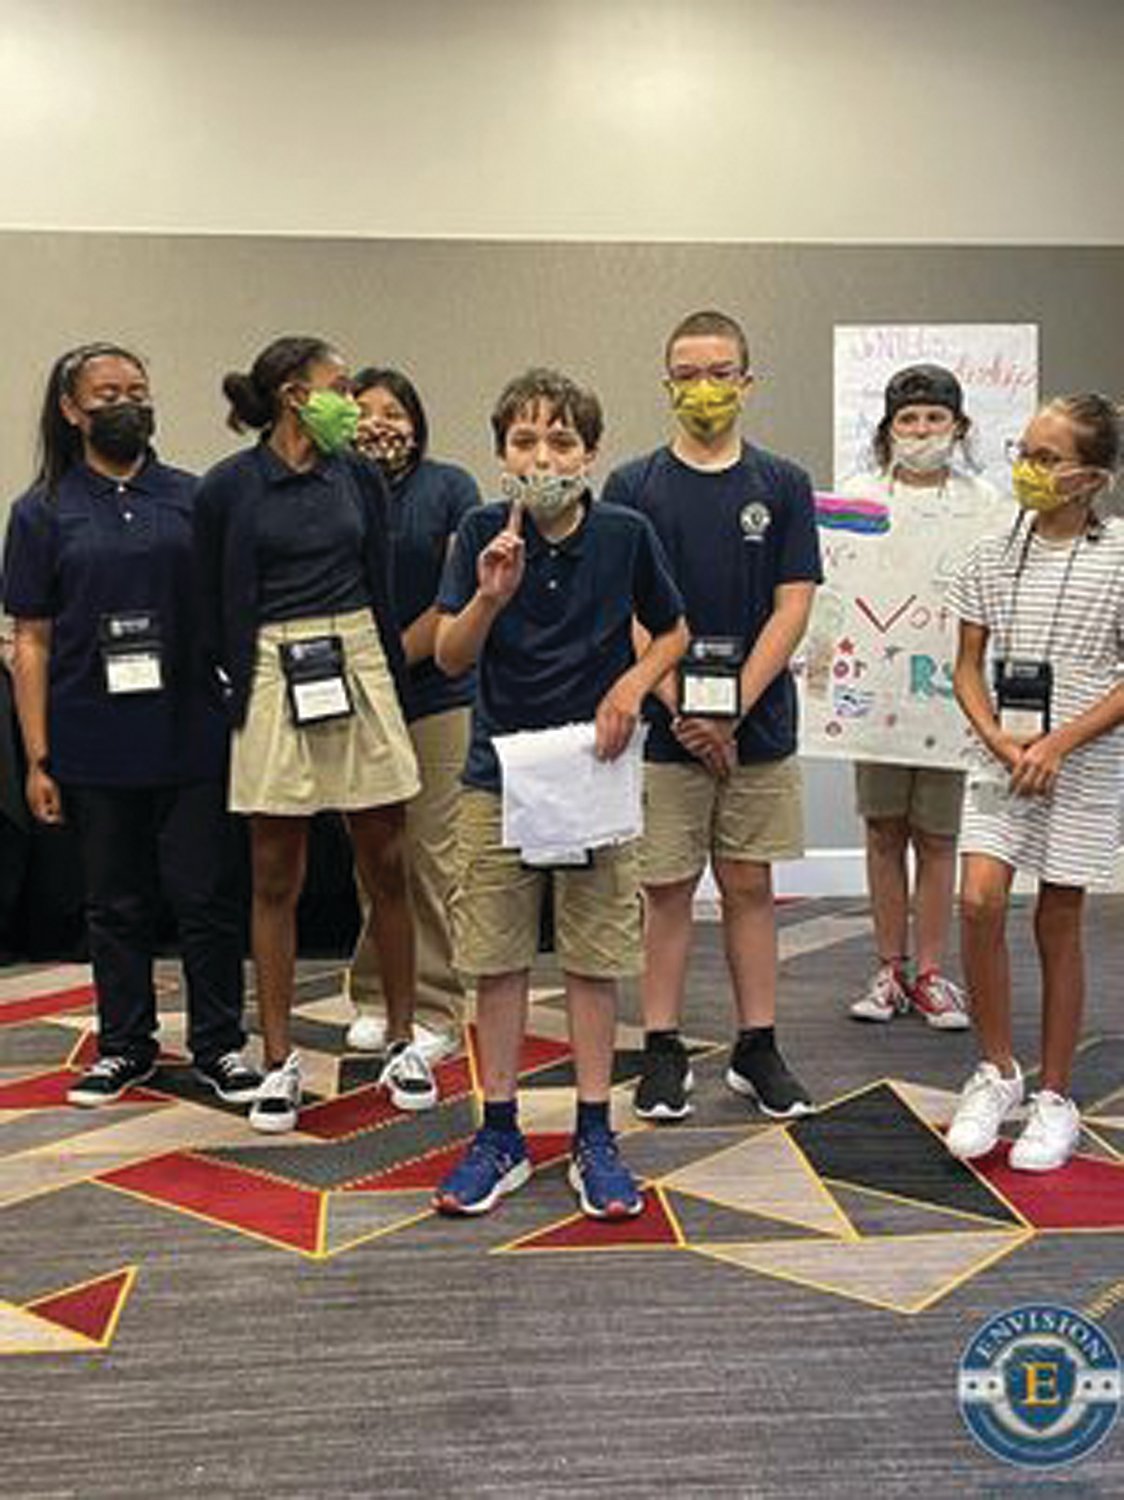 LADIES AND GENTLEMEN, YOUR NEXT PRESIDENT: Ryan Golditch and his campaign team work on getting him elected president at the Envision Junior National Young Leaders Conference in July.